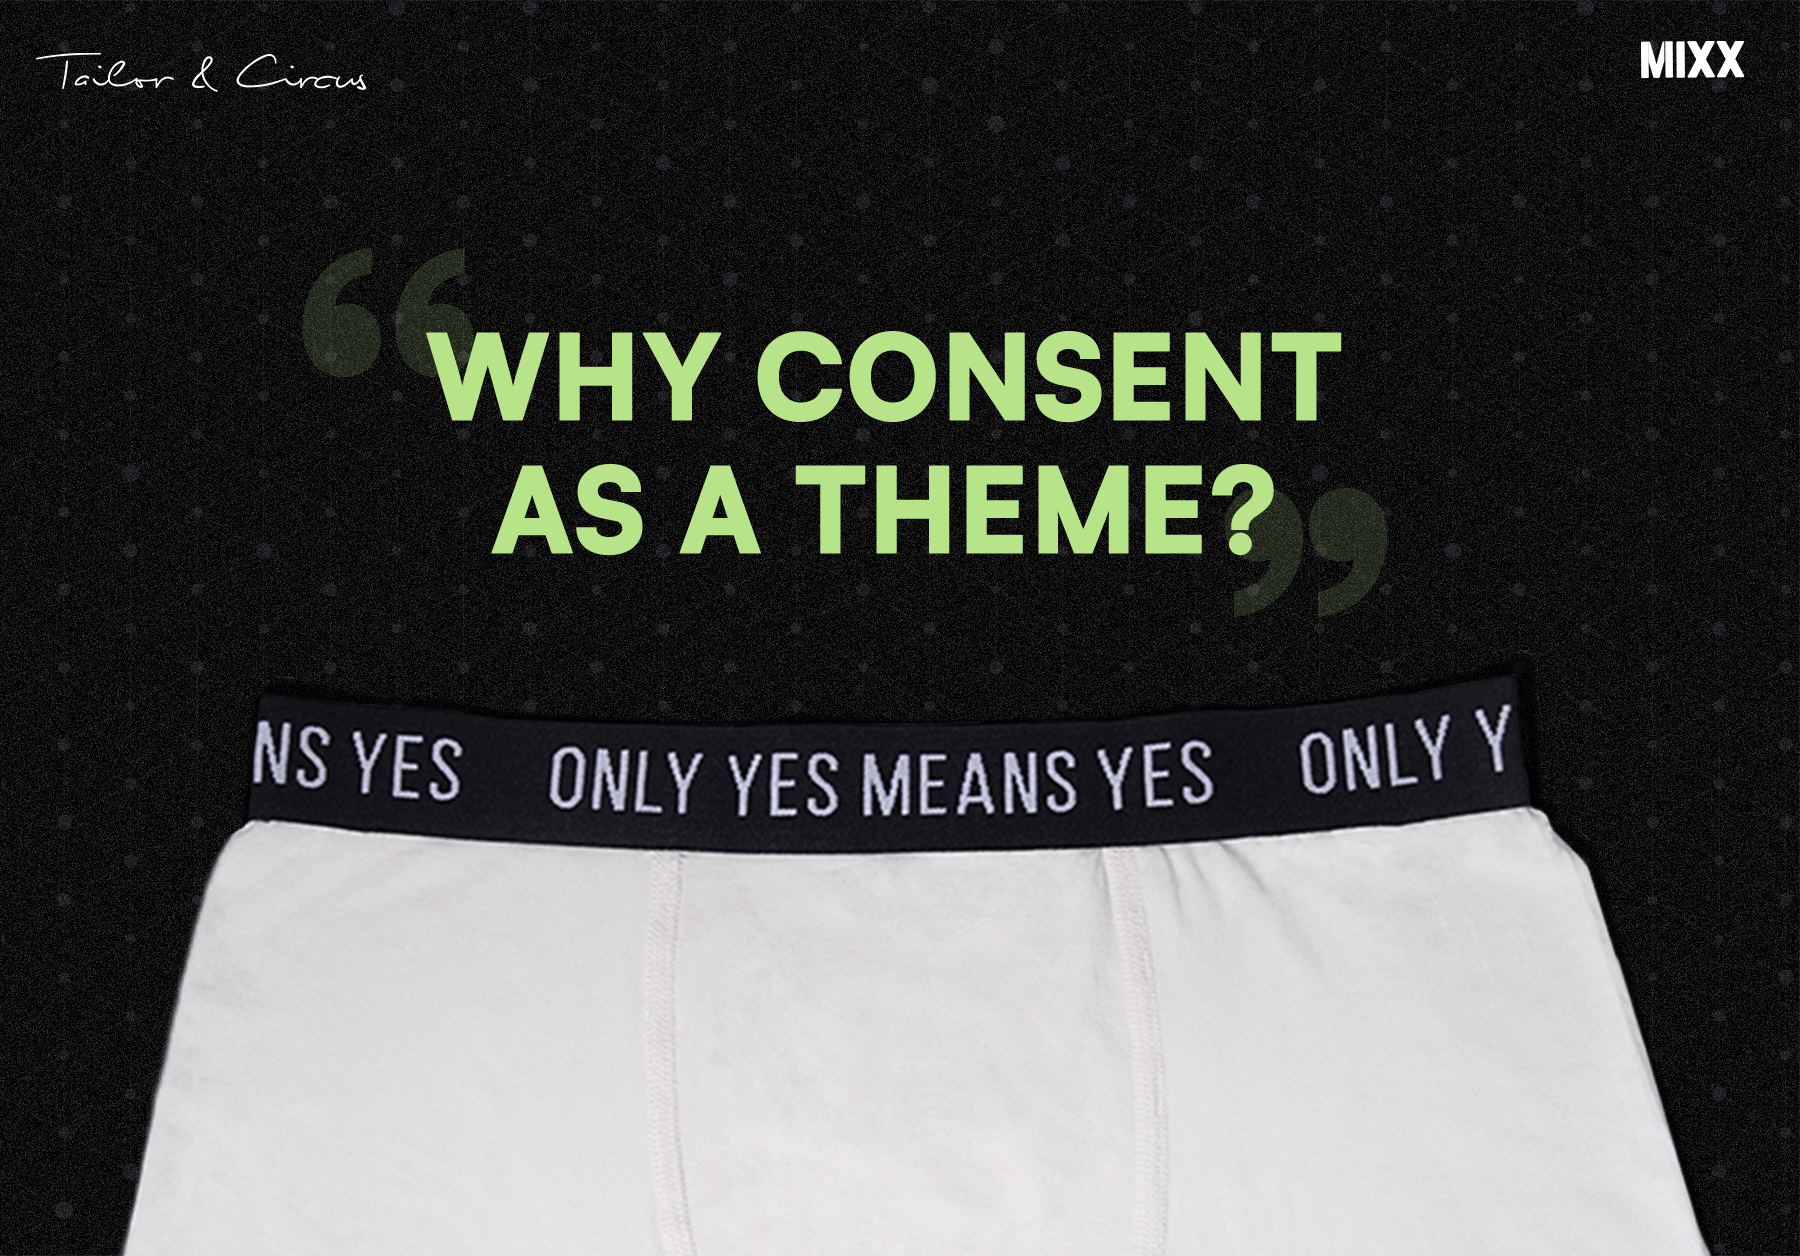 Why CONSENT as a theme?